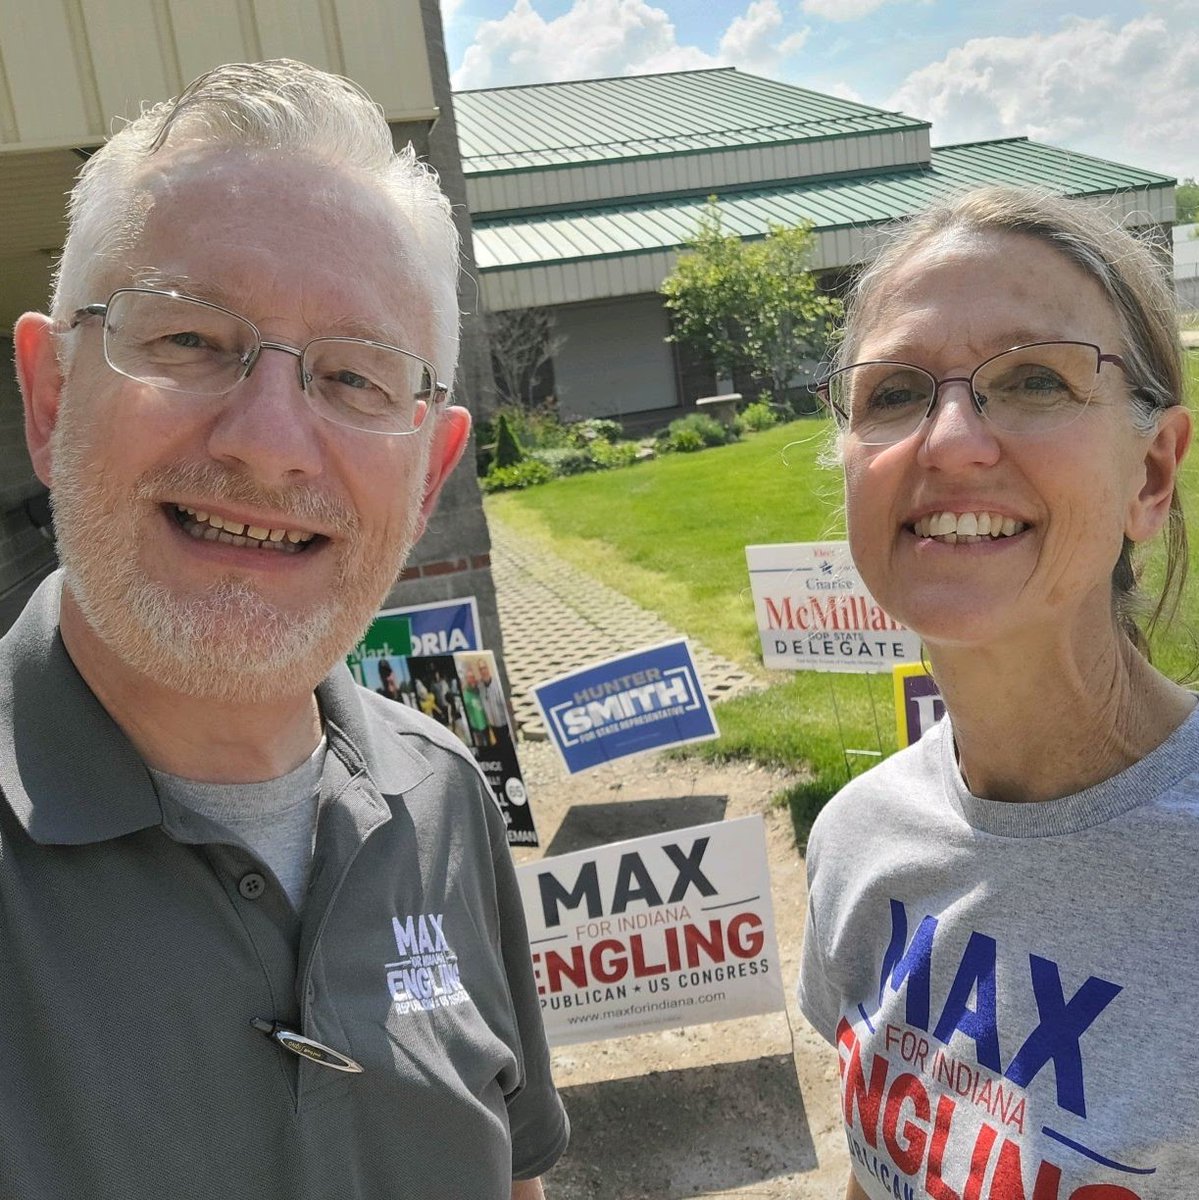 It was a strong Saturday across the district! Fishers, Elwood, Gas City, Kokomo, Pendleton, Noblesville, Anderson, Carmel, Westfield, and Alexandria were all active and voting!

Send me a note if you would like to volunteer outside the polls on election day!
#IN05 #Congress